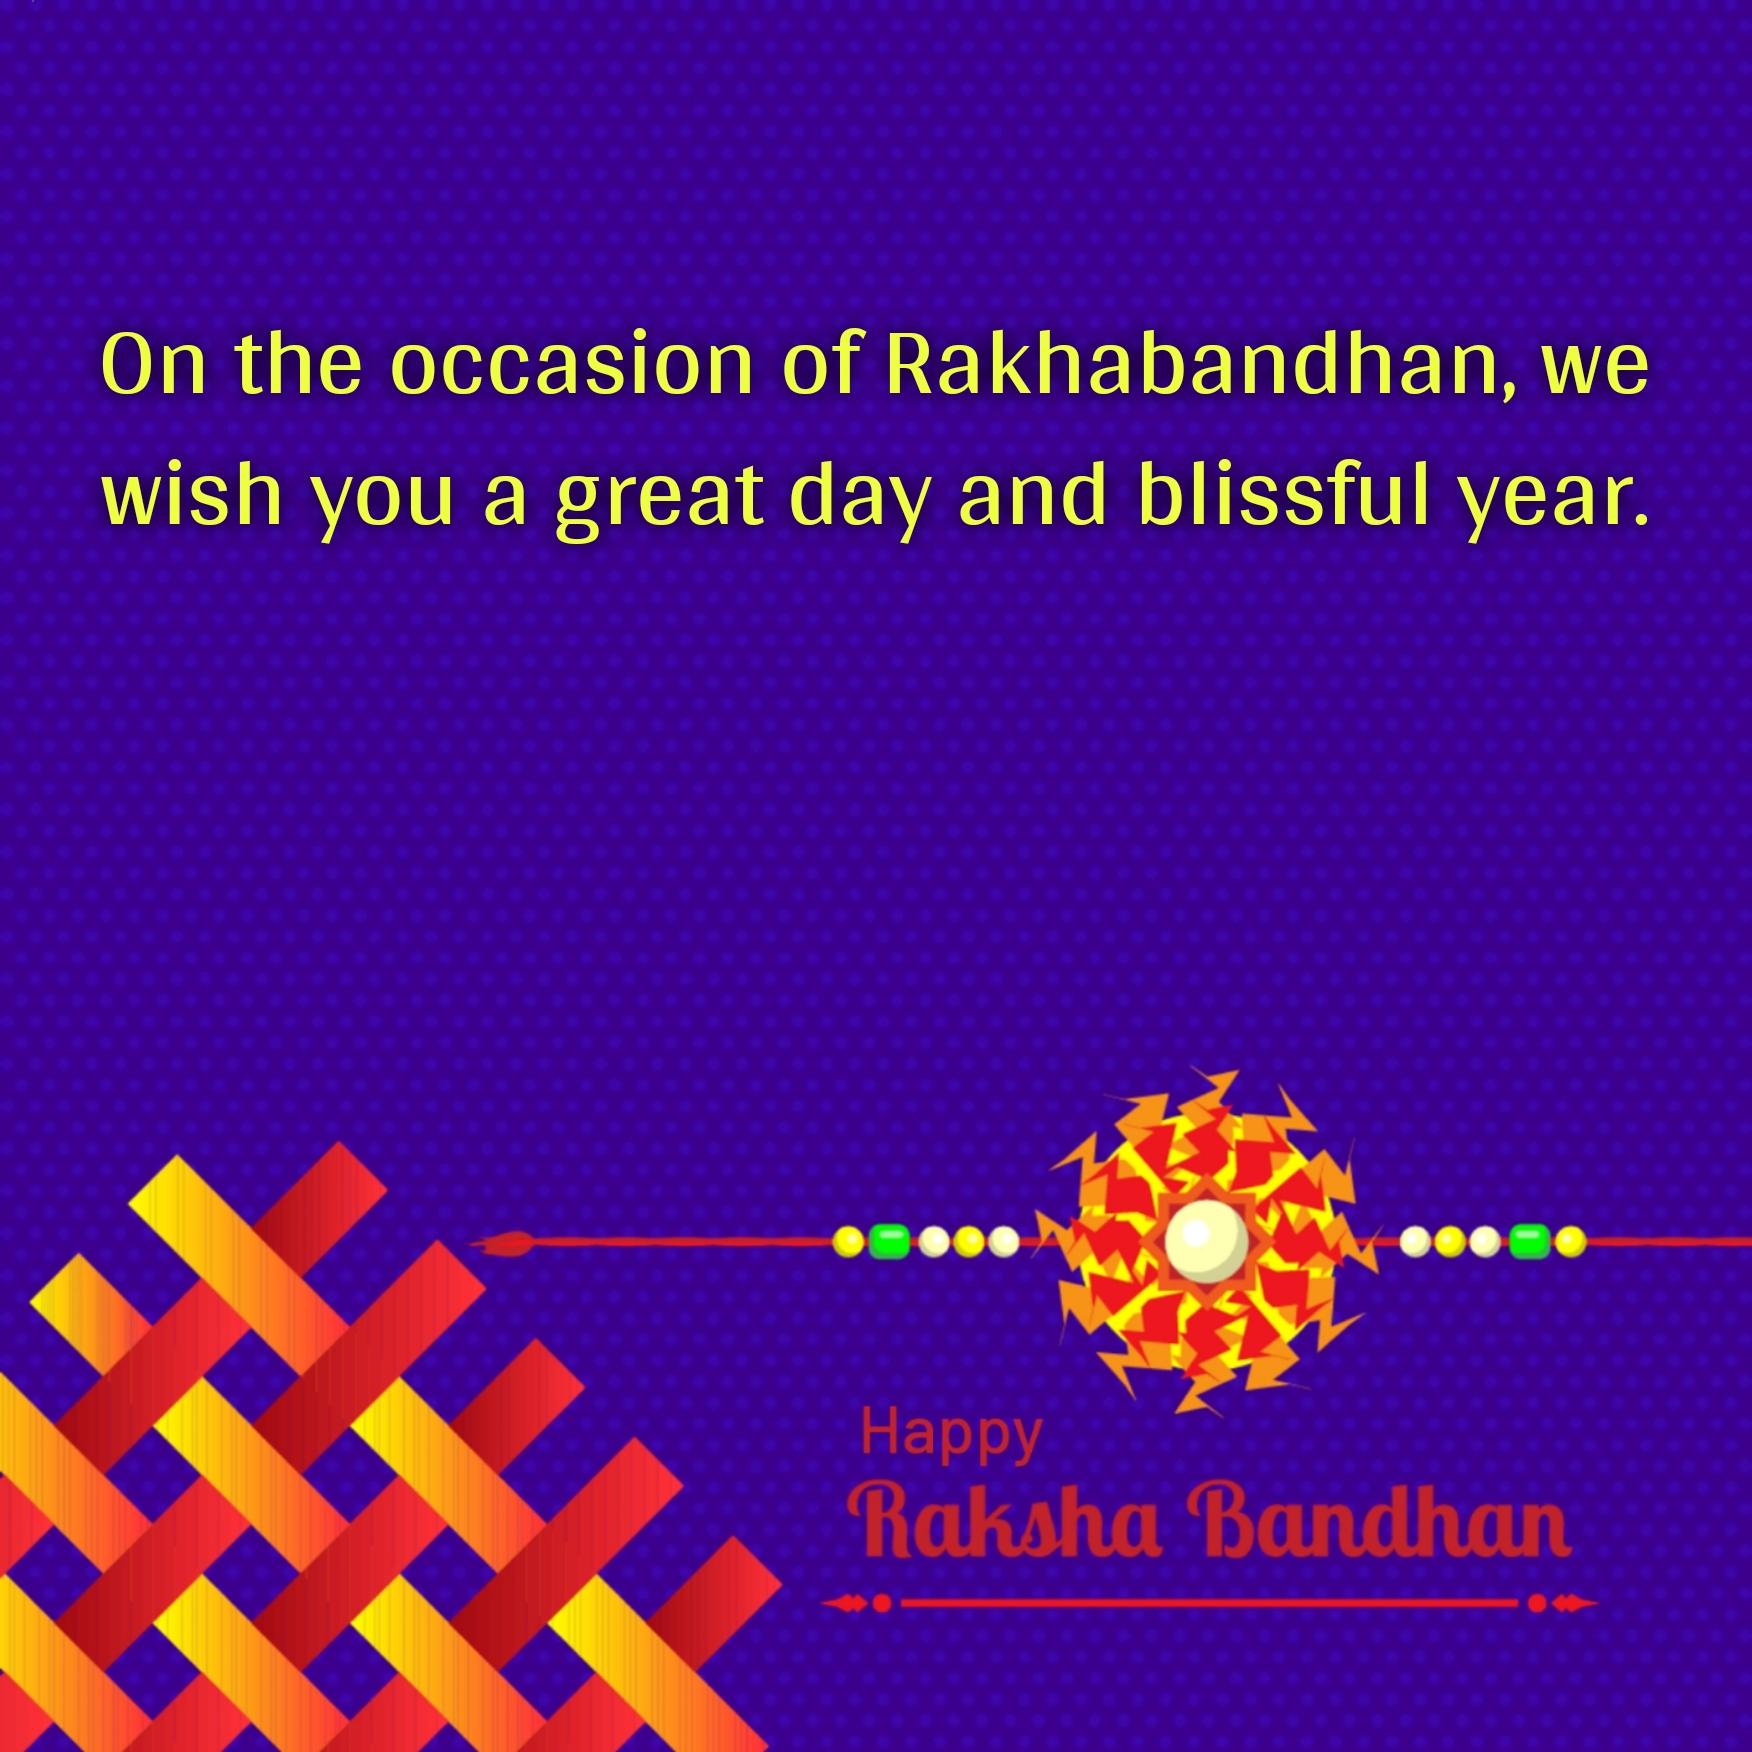 On the occasion of Rakhabandhan we wish you a great day